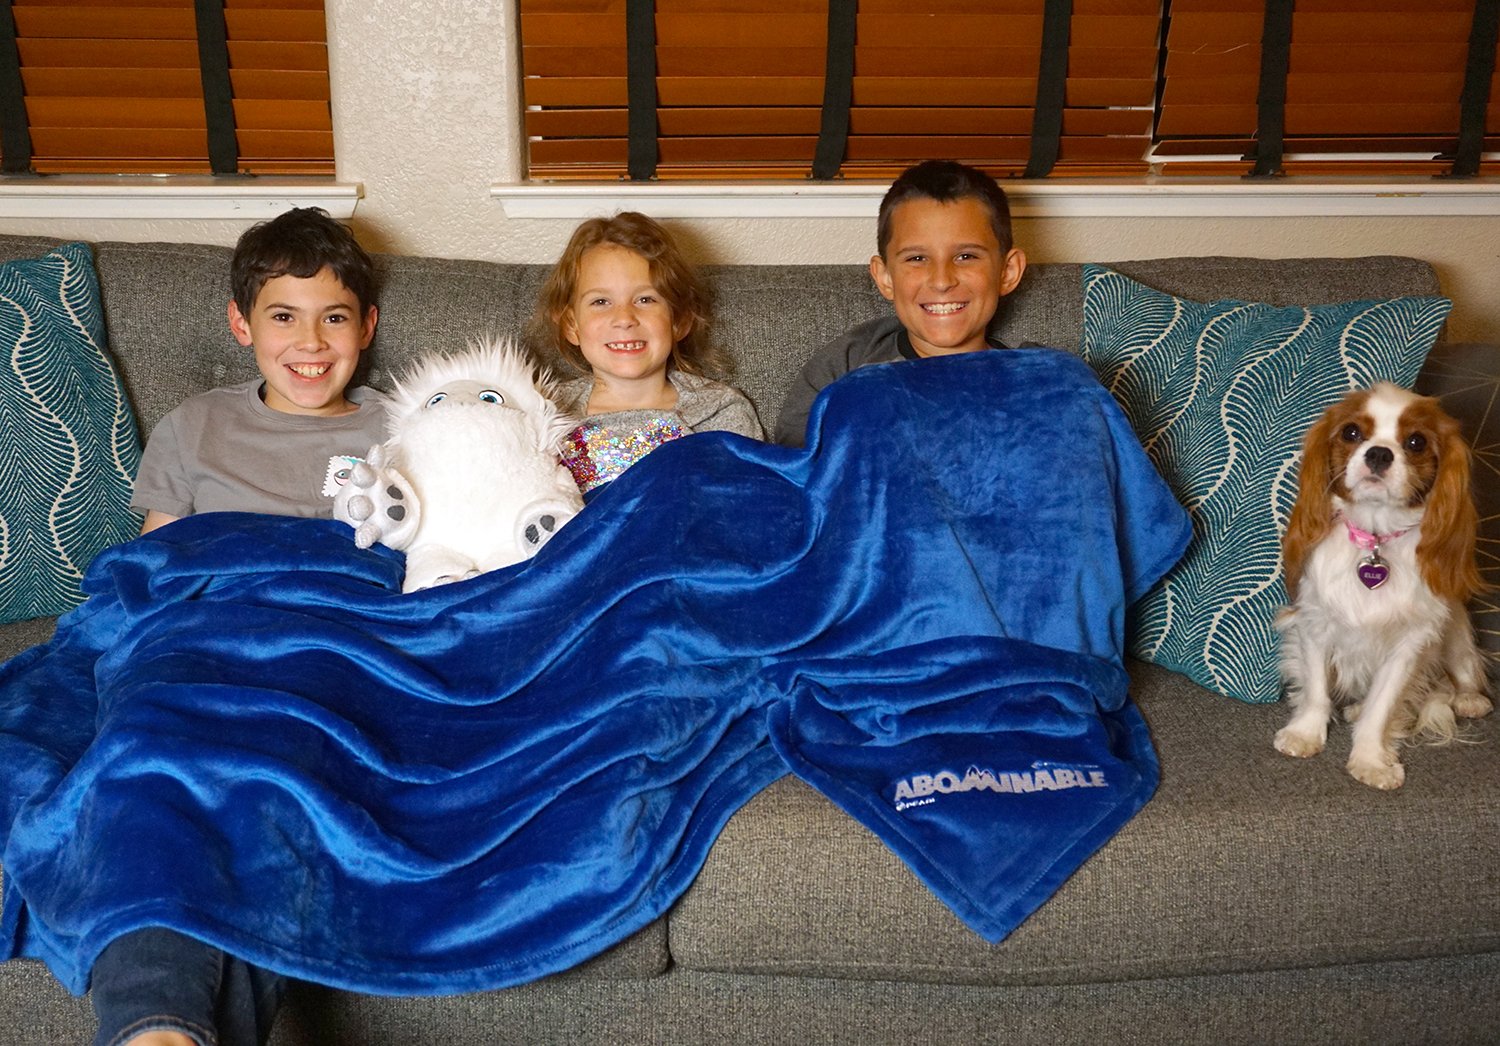 kids snuggled in blanket ready to watch abominable movie